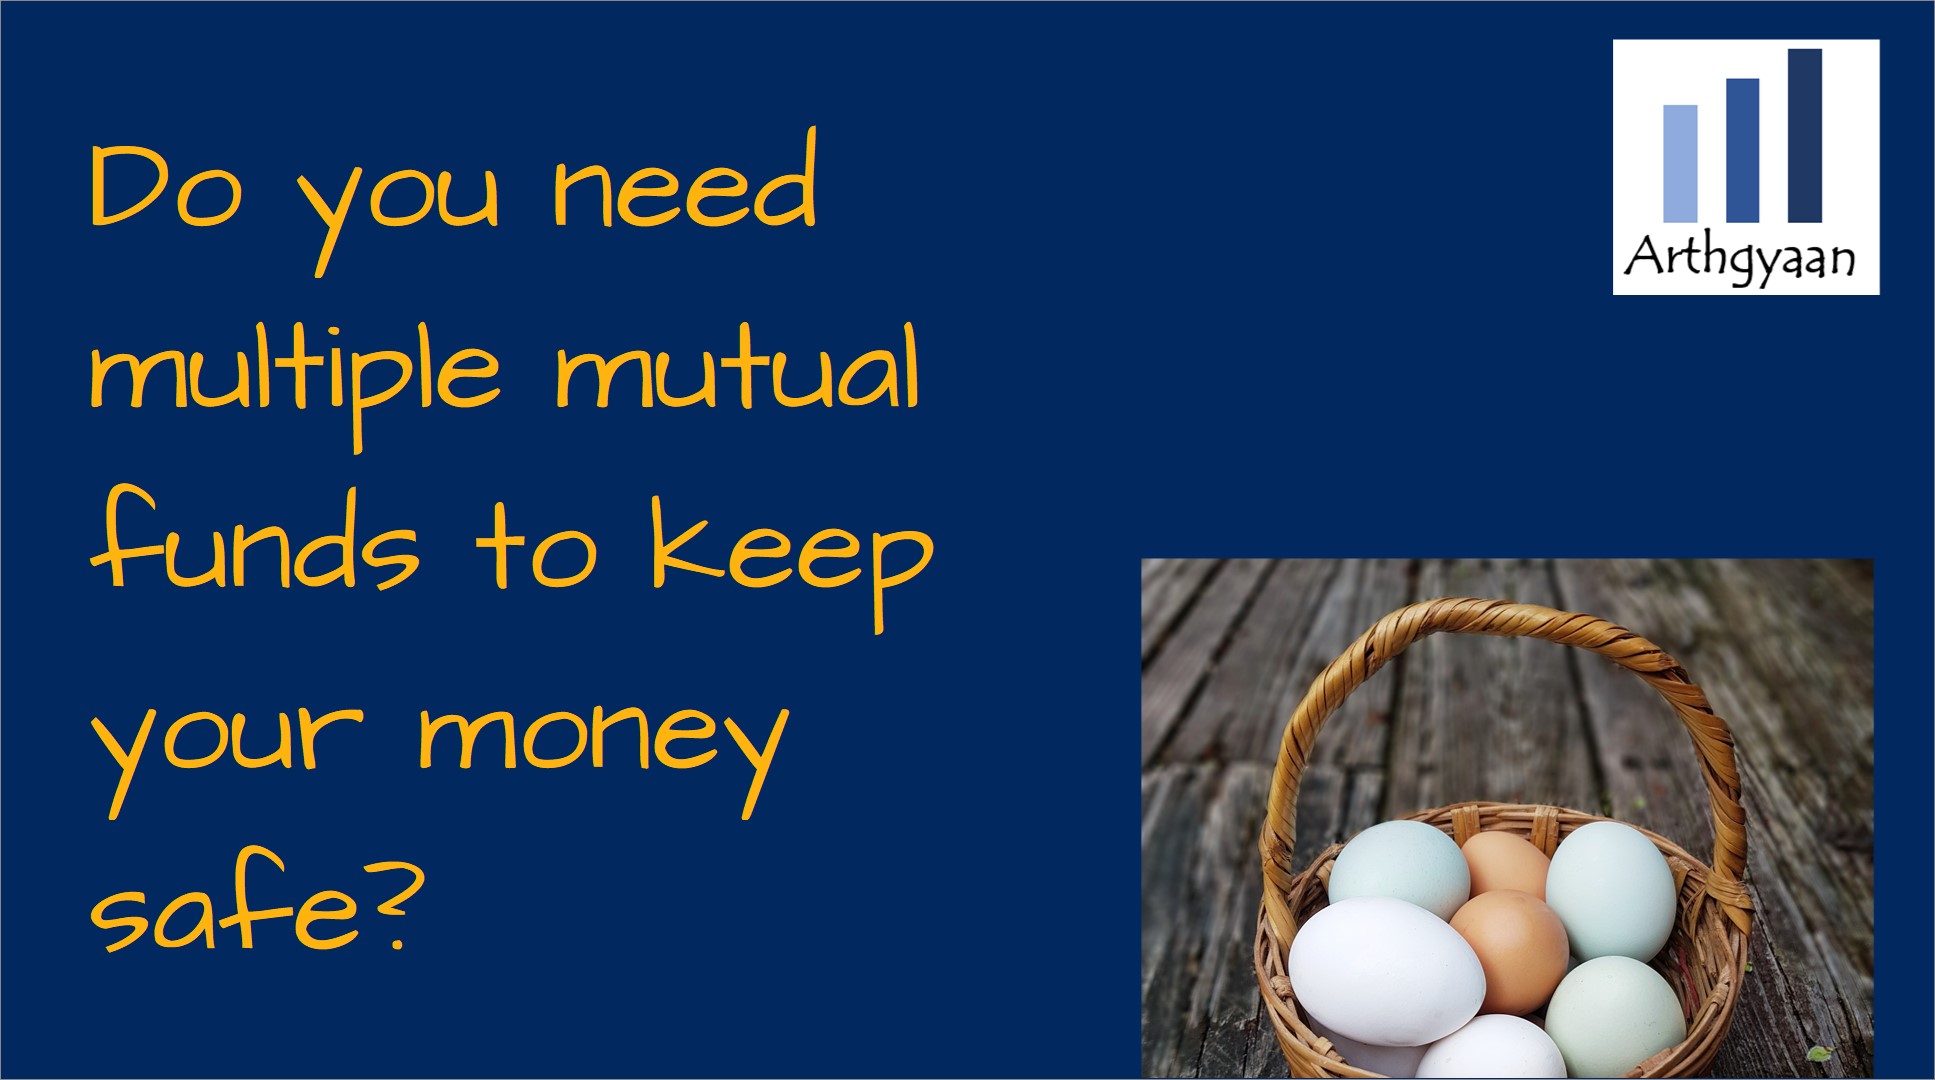 Do you need multiple mutual funds to keep your money safe?